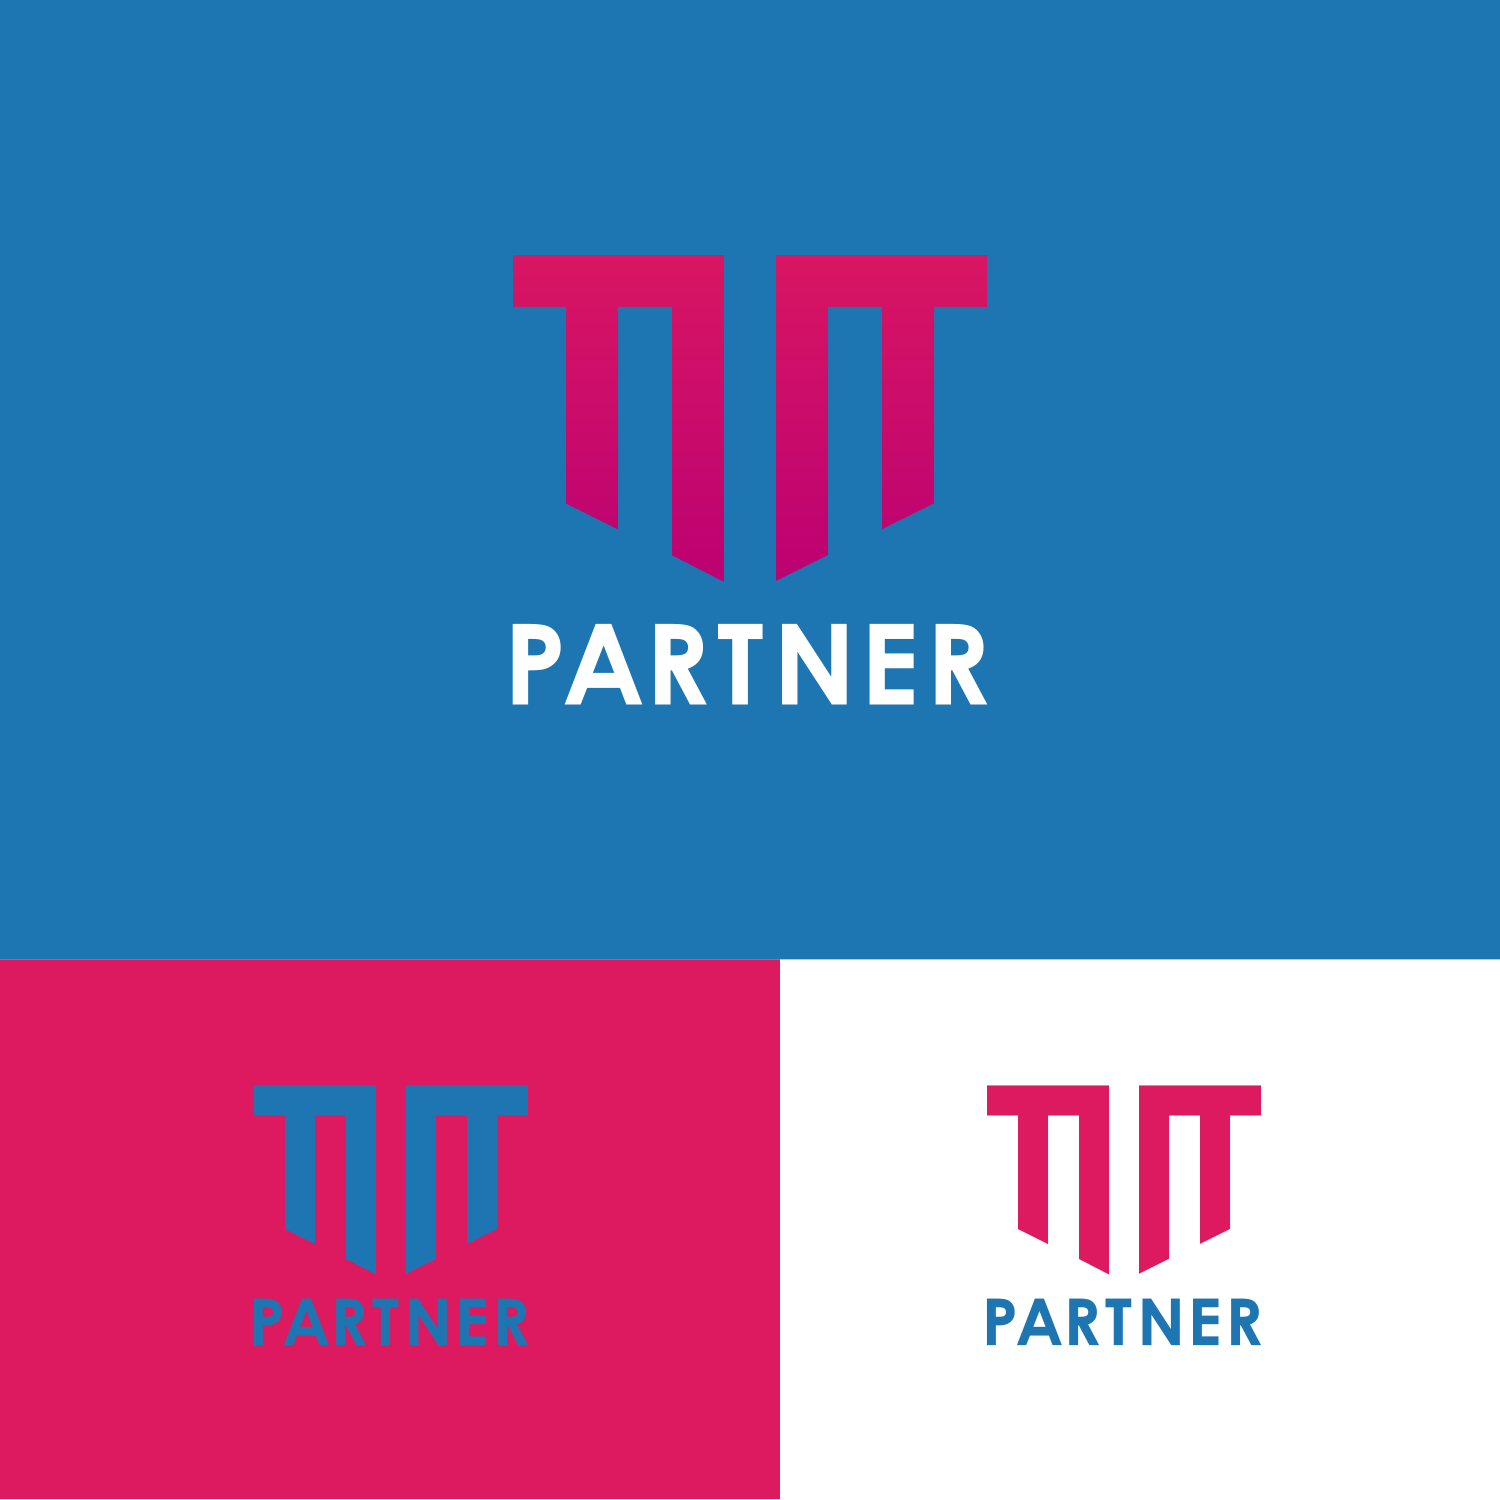 Two Blue Lines Logo - Logo Design for Tillit and Partner in two separate lines in top